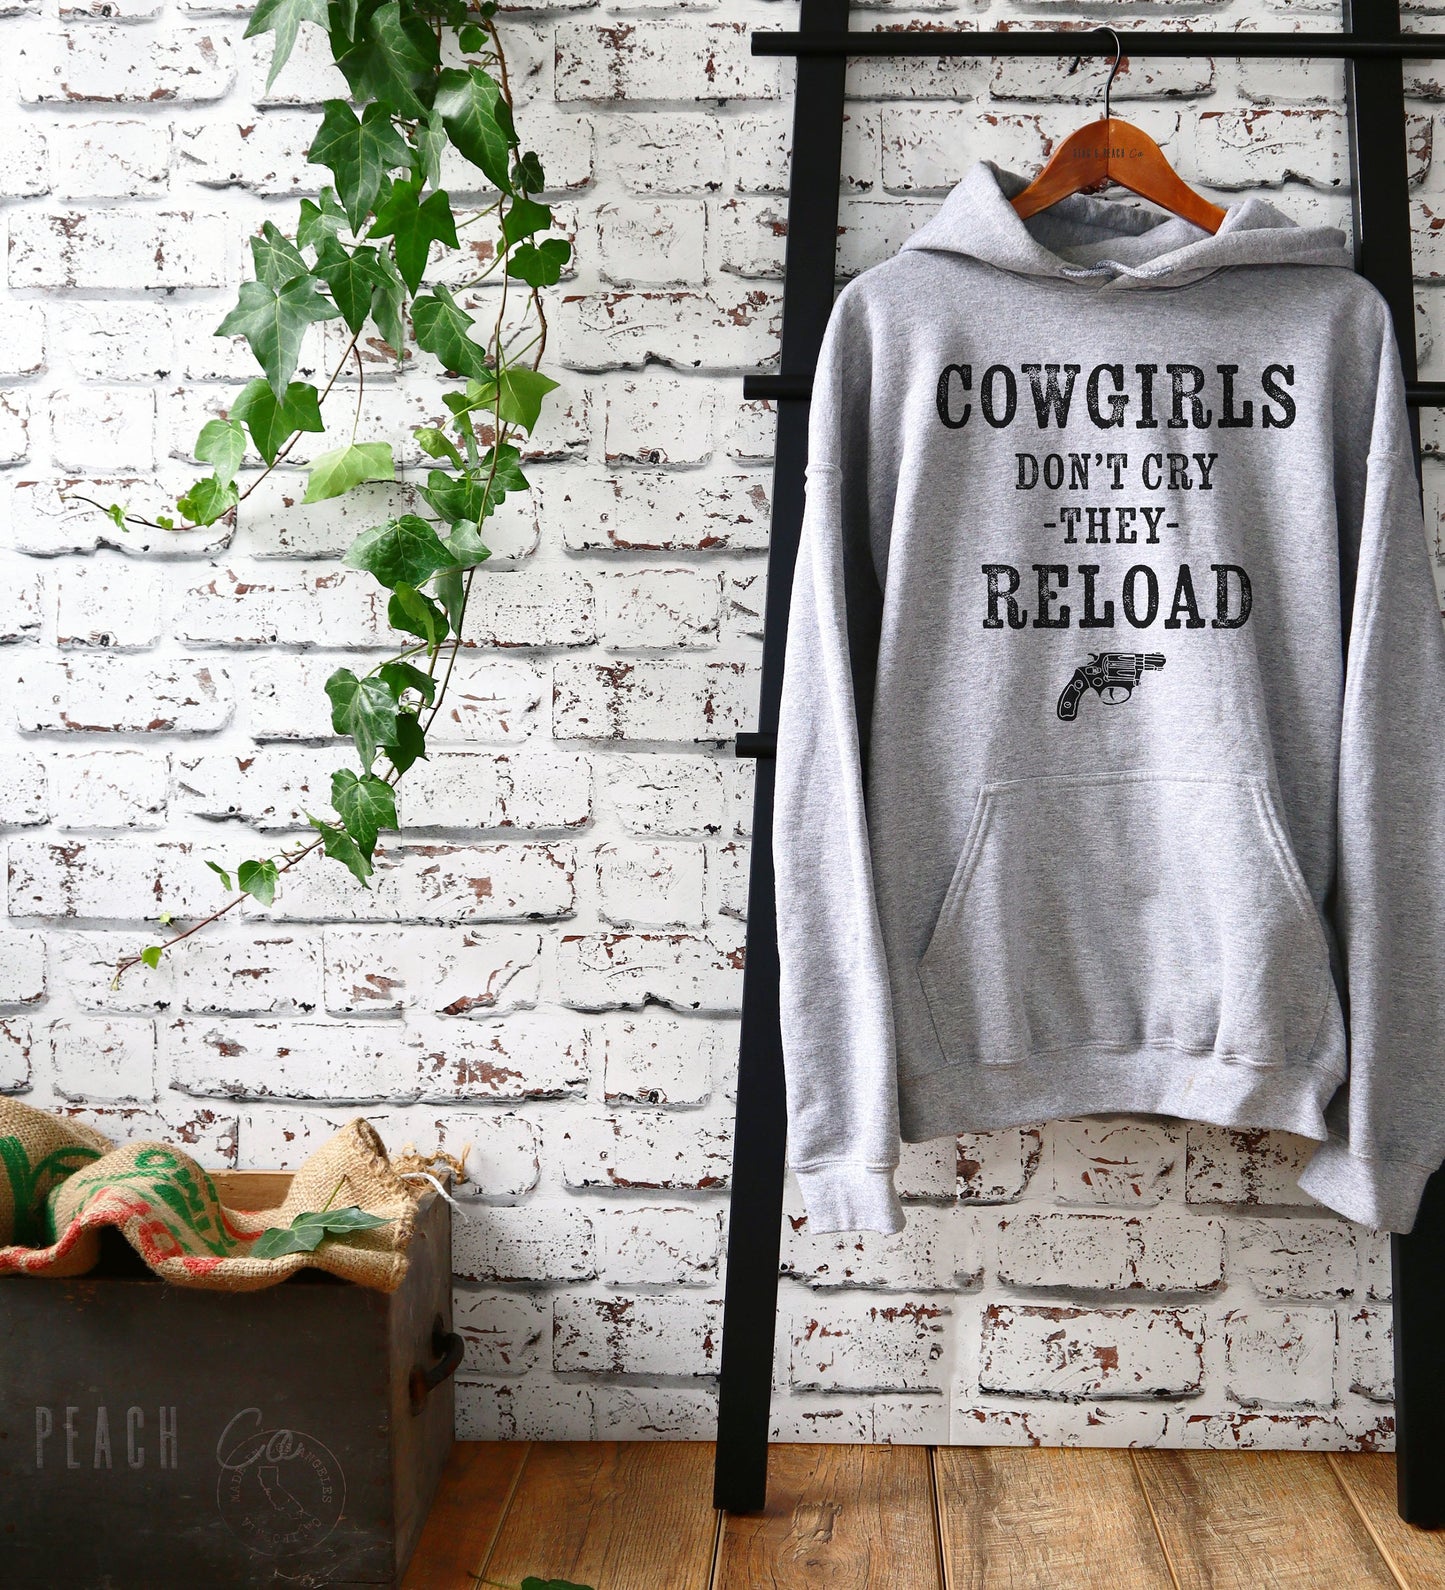 Cowgirls Don't Cry They Reload Hoodie - Country Girl Shirt, Cowgirl Shirts, Cowgirl Outfit, Rodeo Shirt, Western Shirt, Cowgirl TeeShirt